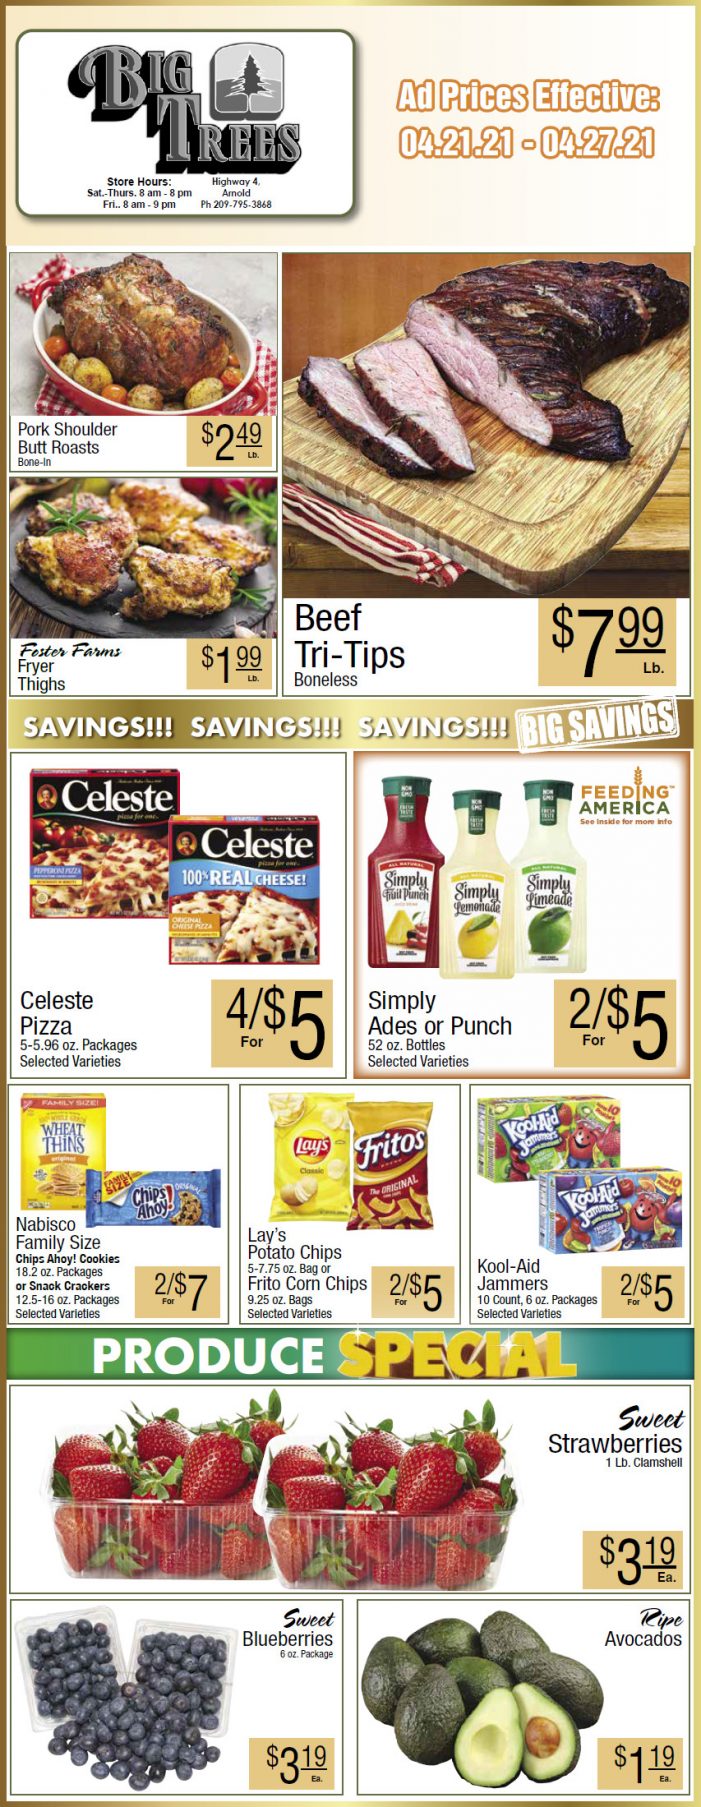 Big Trees Market Weekly Ad & Grocery Specials Through April 27th!  Shop Local & Save!!